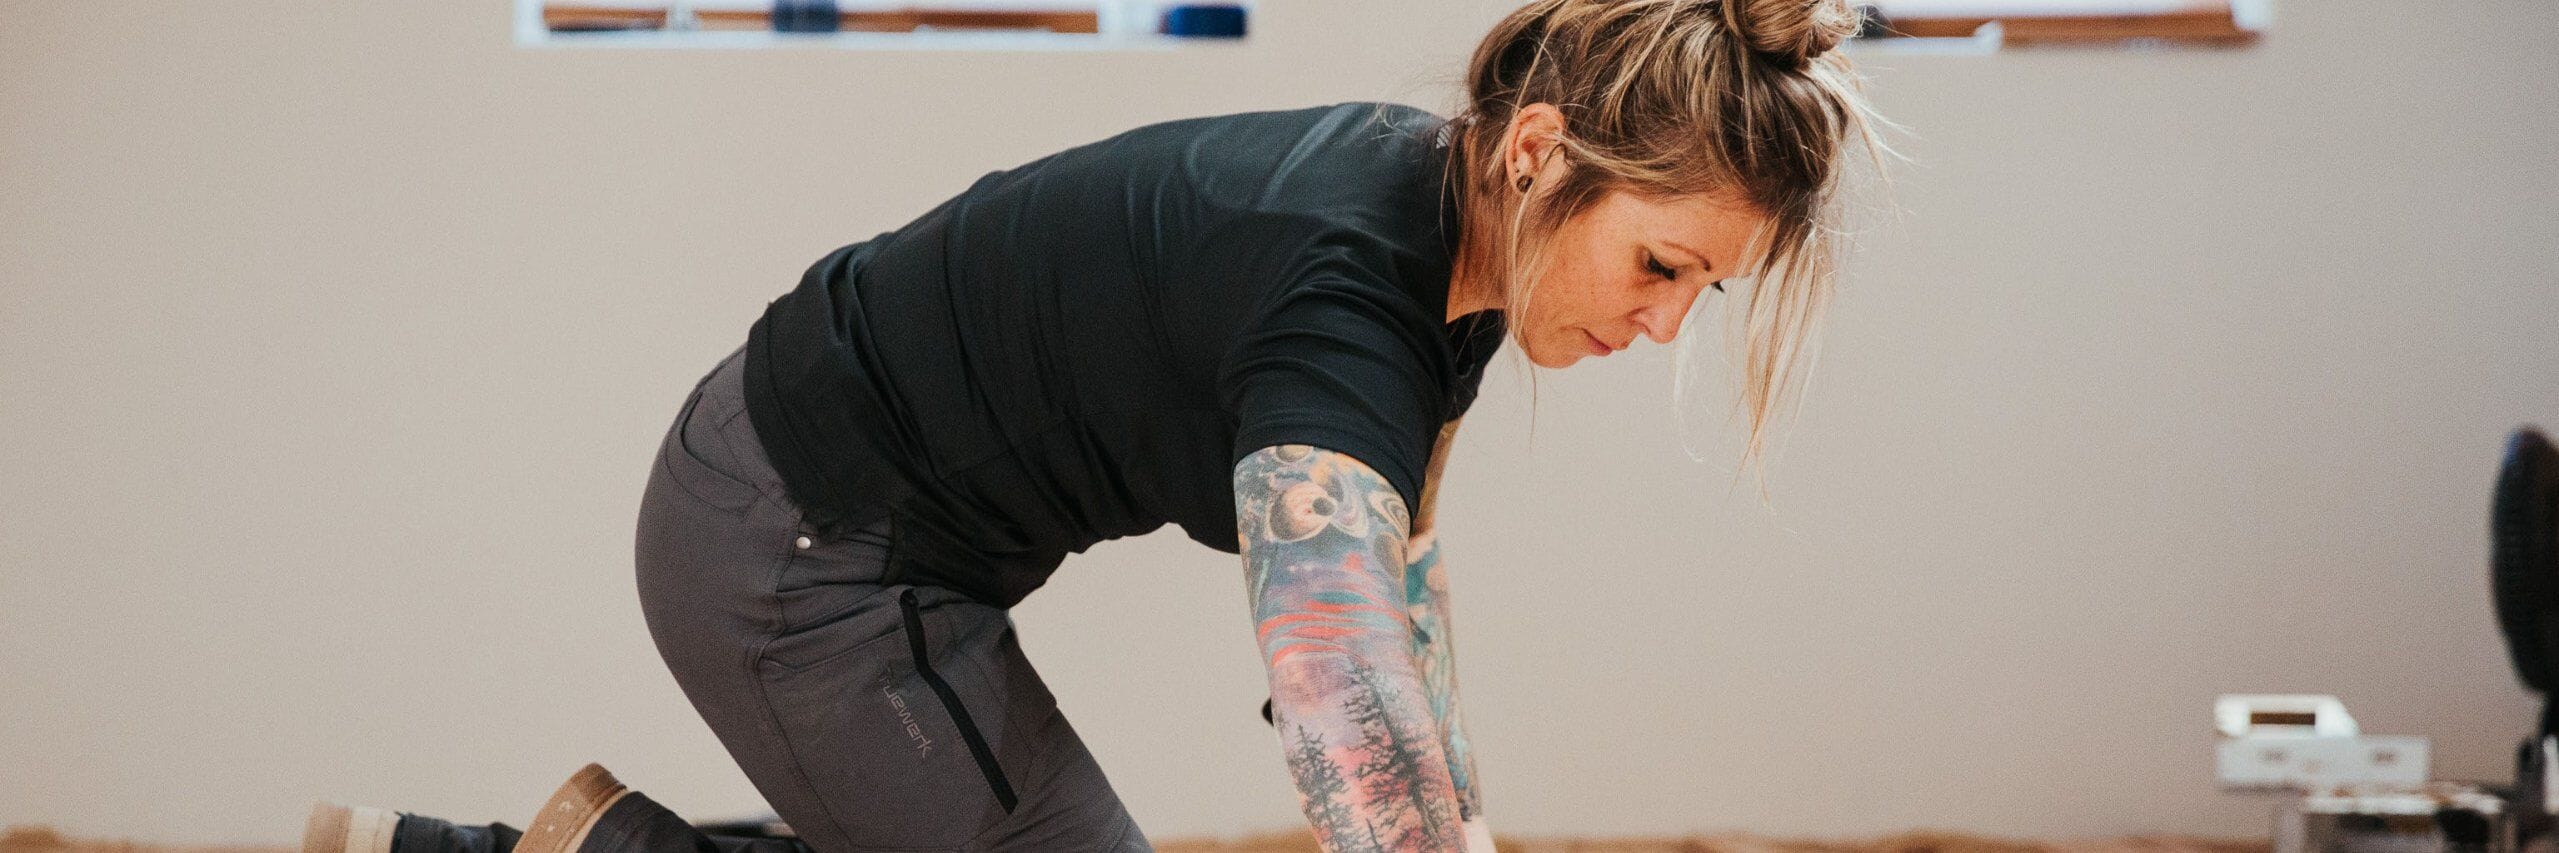 A trade professional with colorful tattoos and dark gray Truewerk workwear pants works on a wood floor during a renovation.